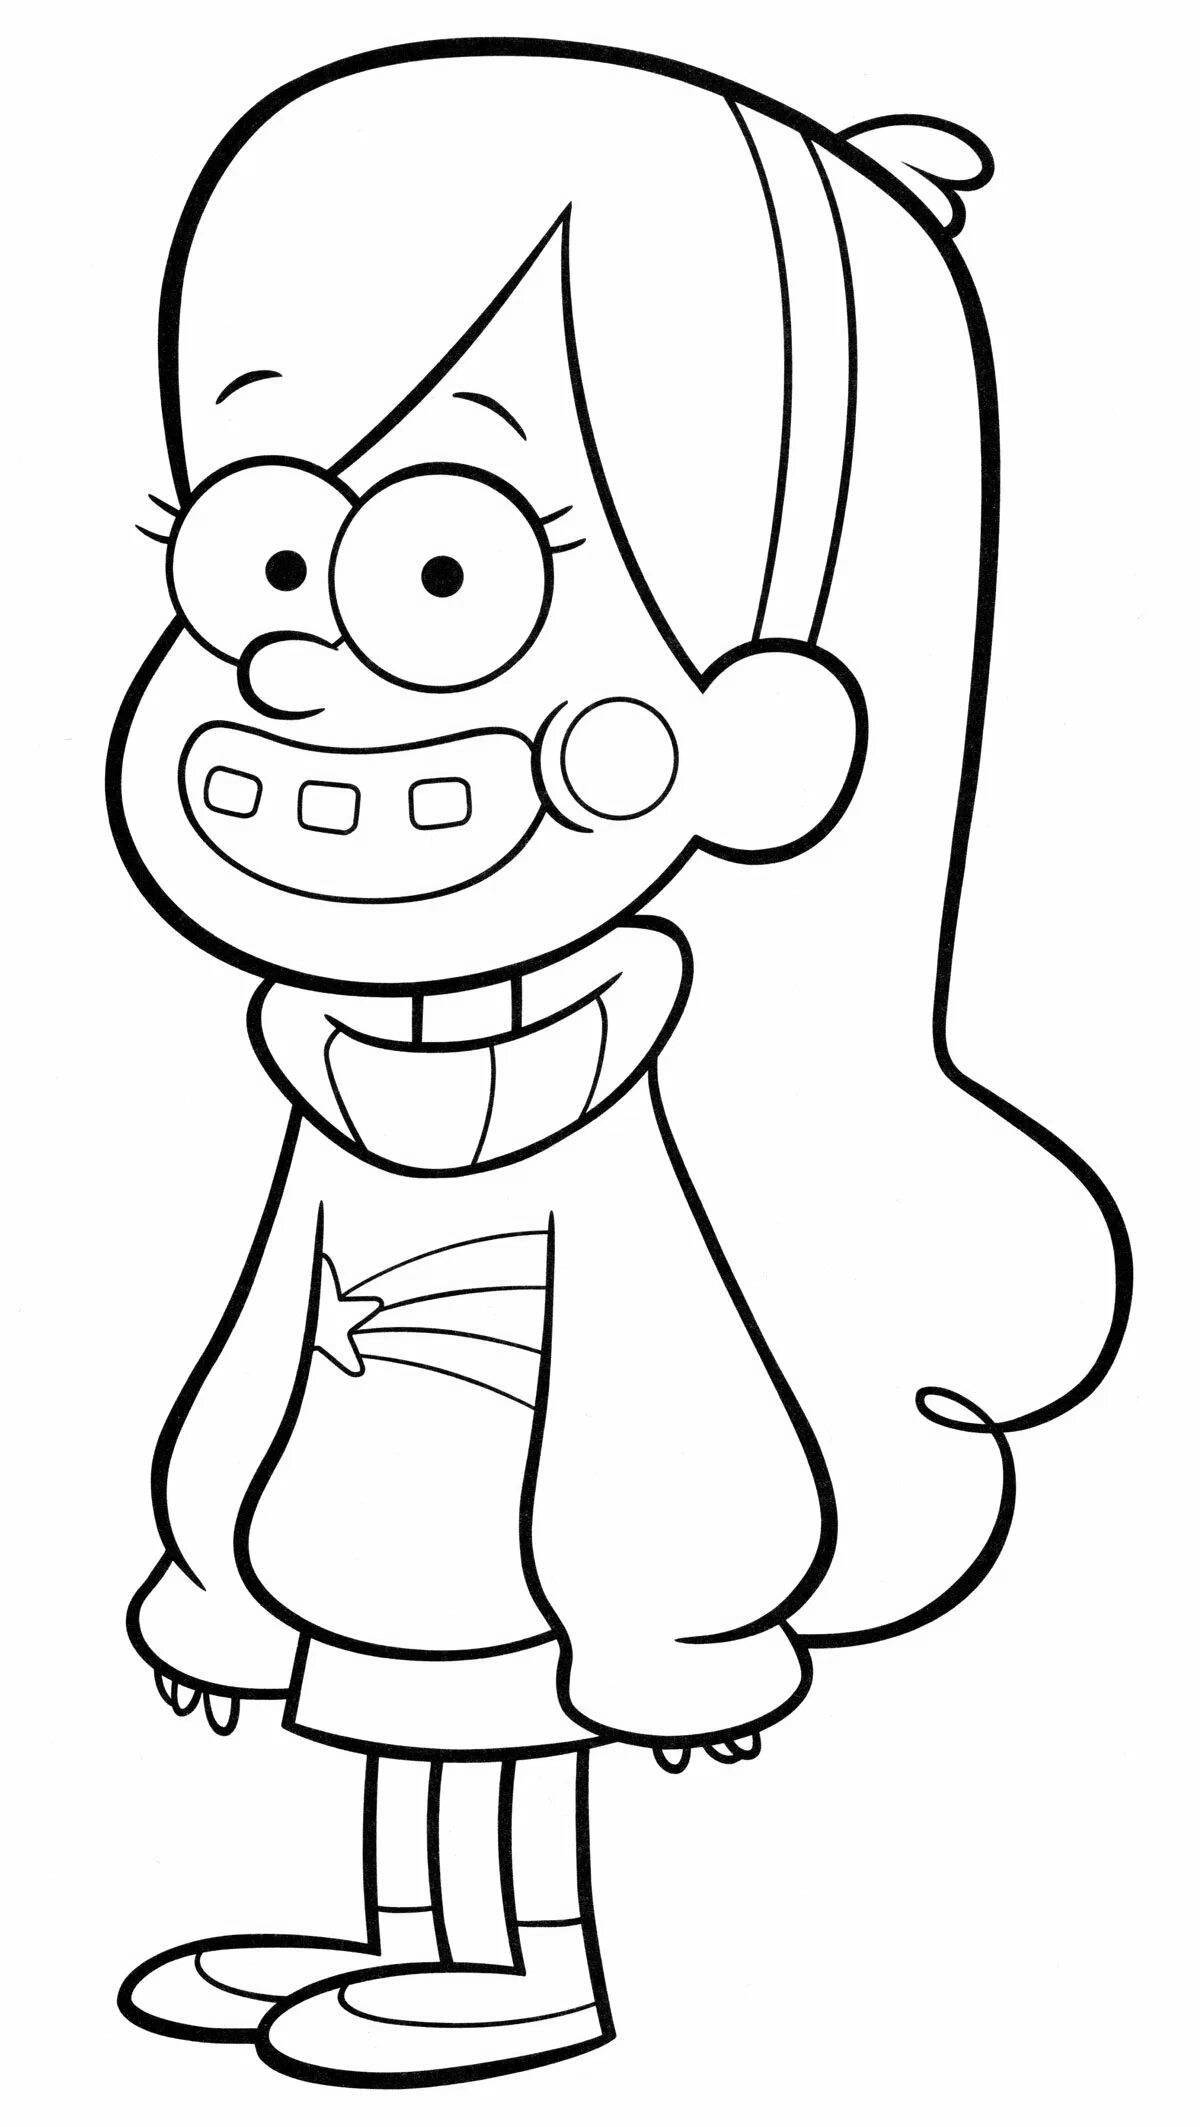 Joyful mabel and chubby coloring book